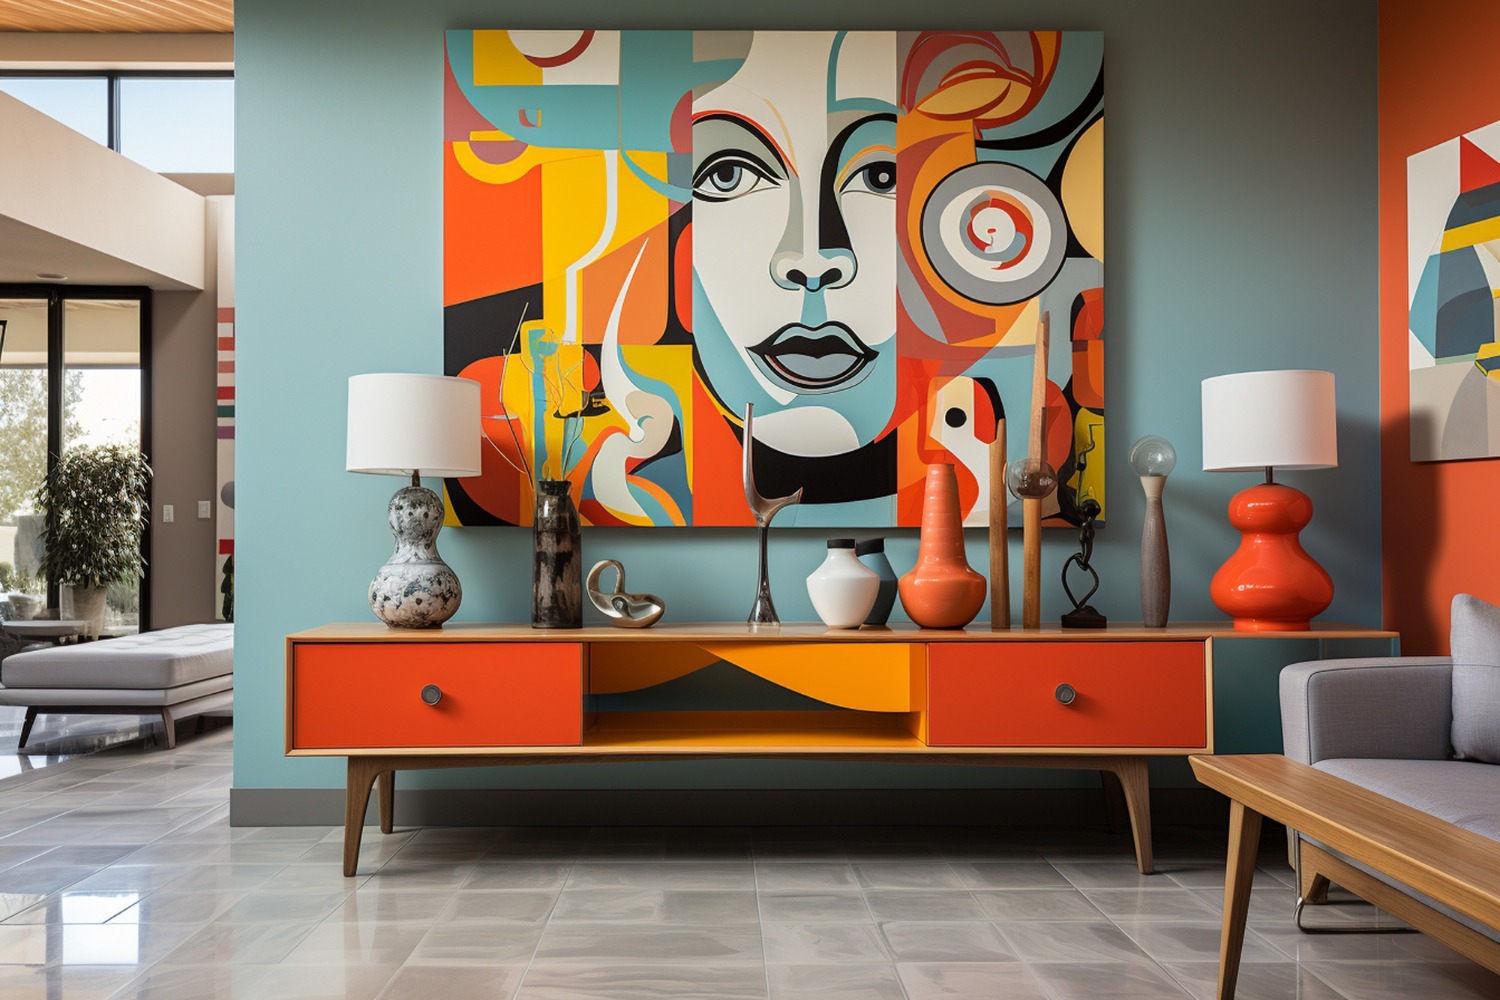 Transform Your Walls into Eye-Catching Masterpieces with These Innovative Decor Ideas